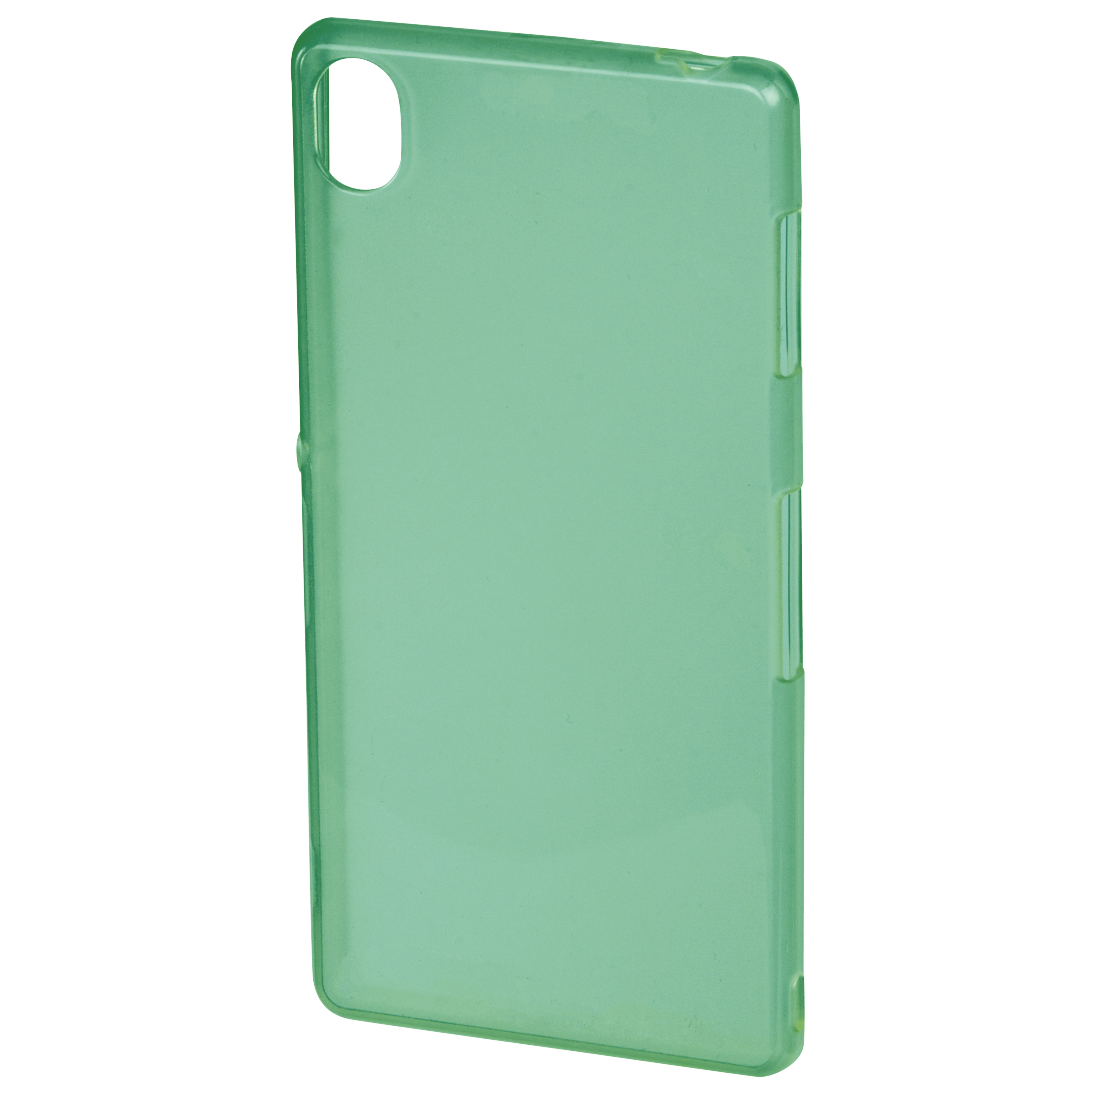 Hama "Ultra Slim" Cover for Xperia Z3 Compact, green |